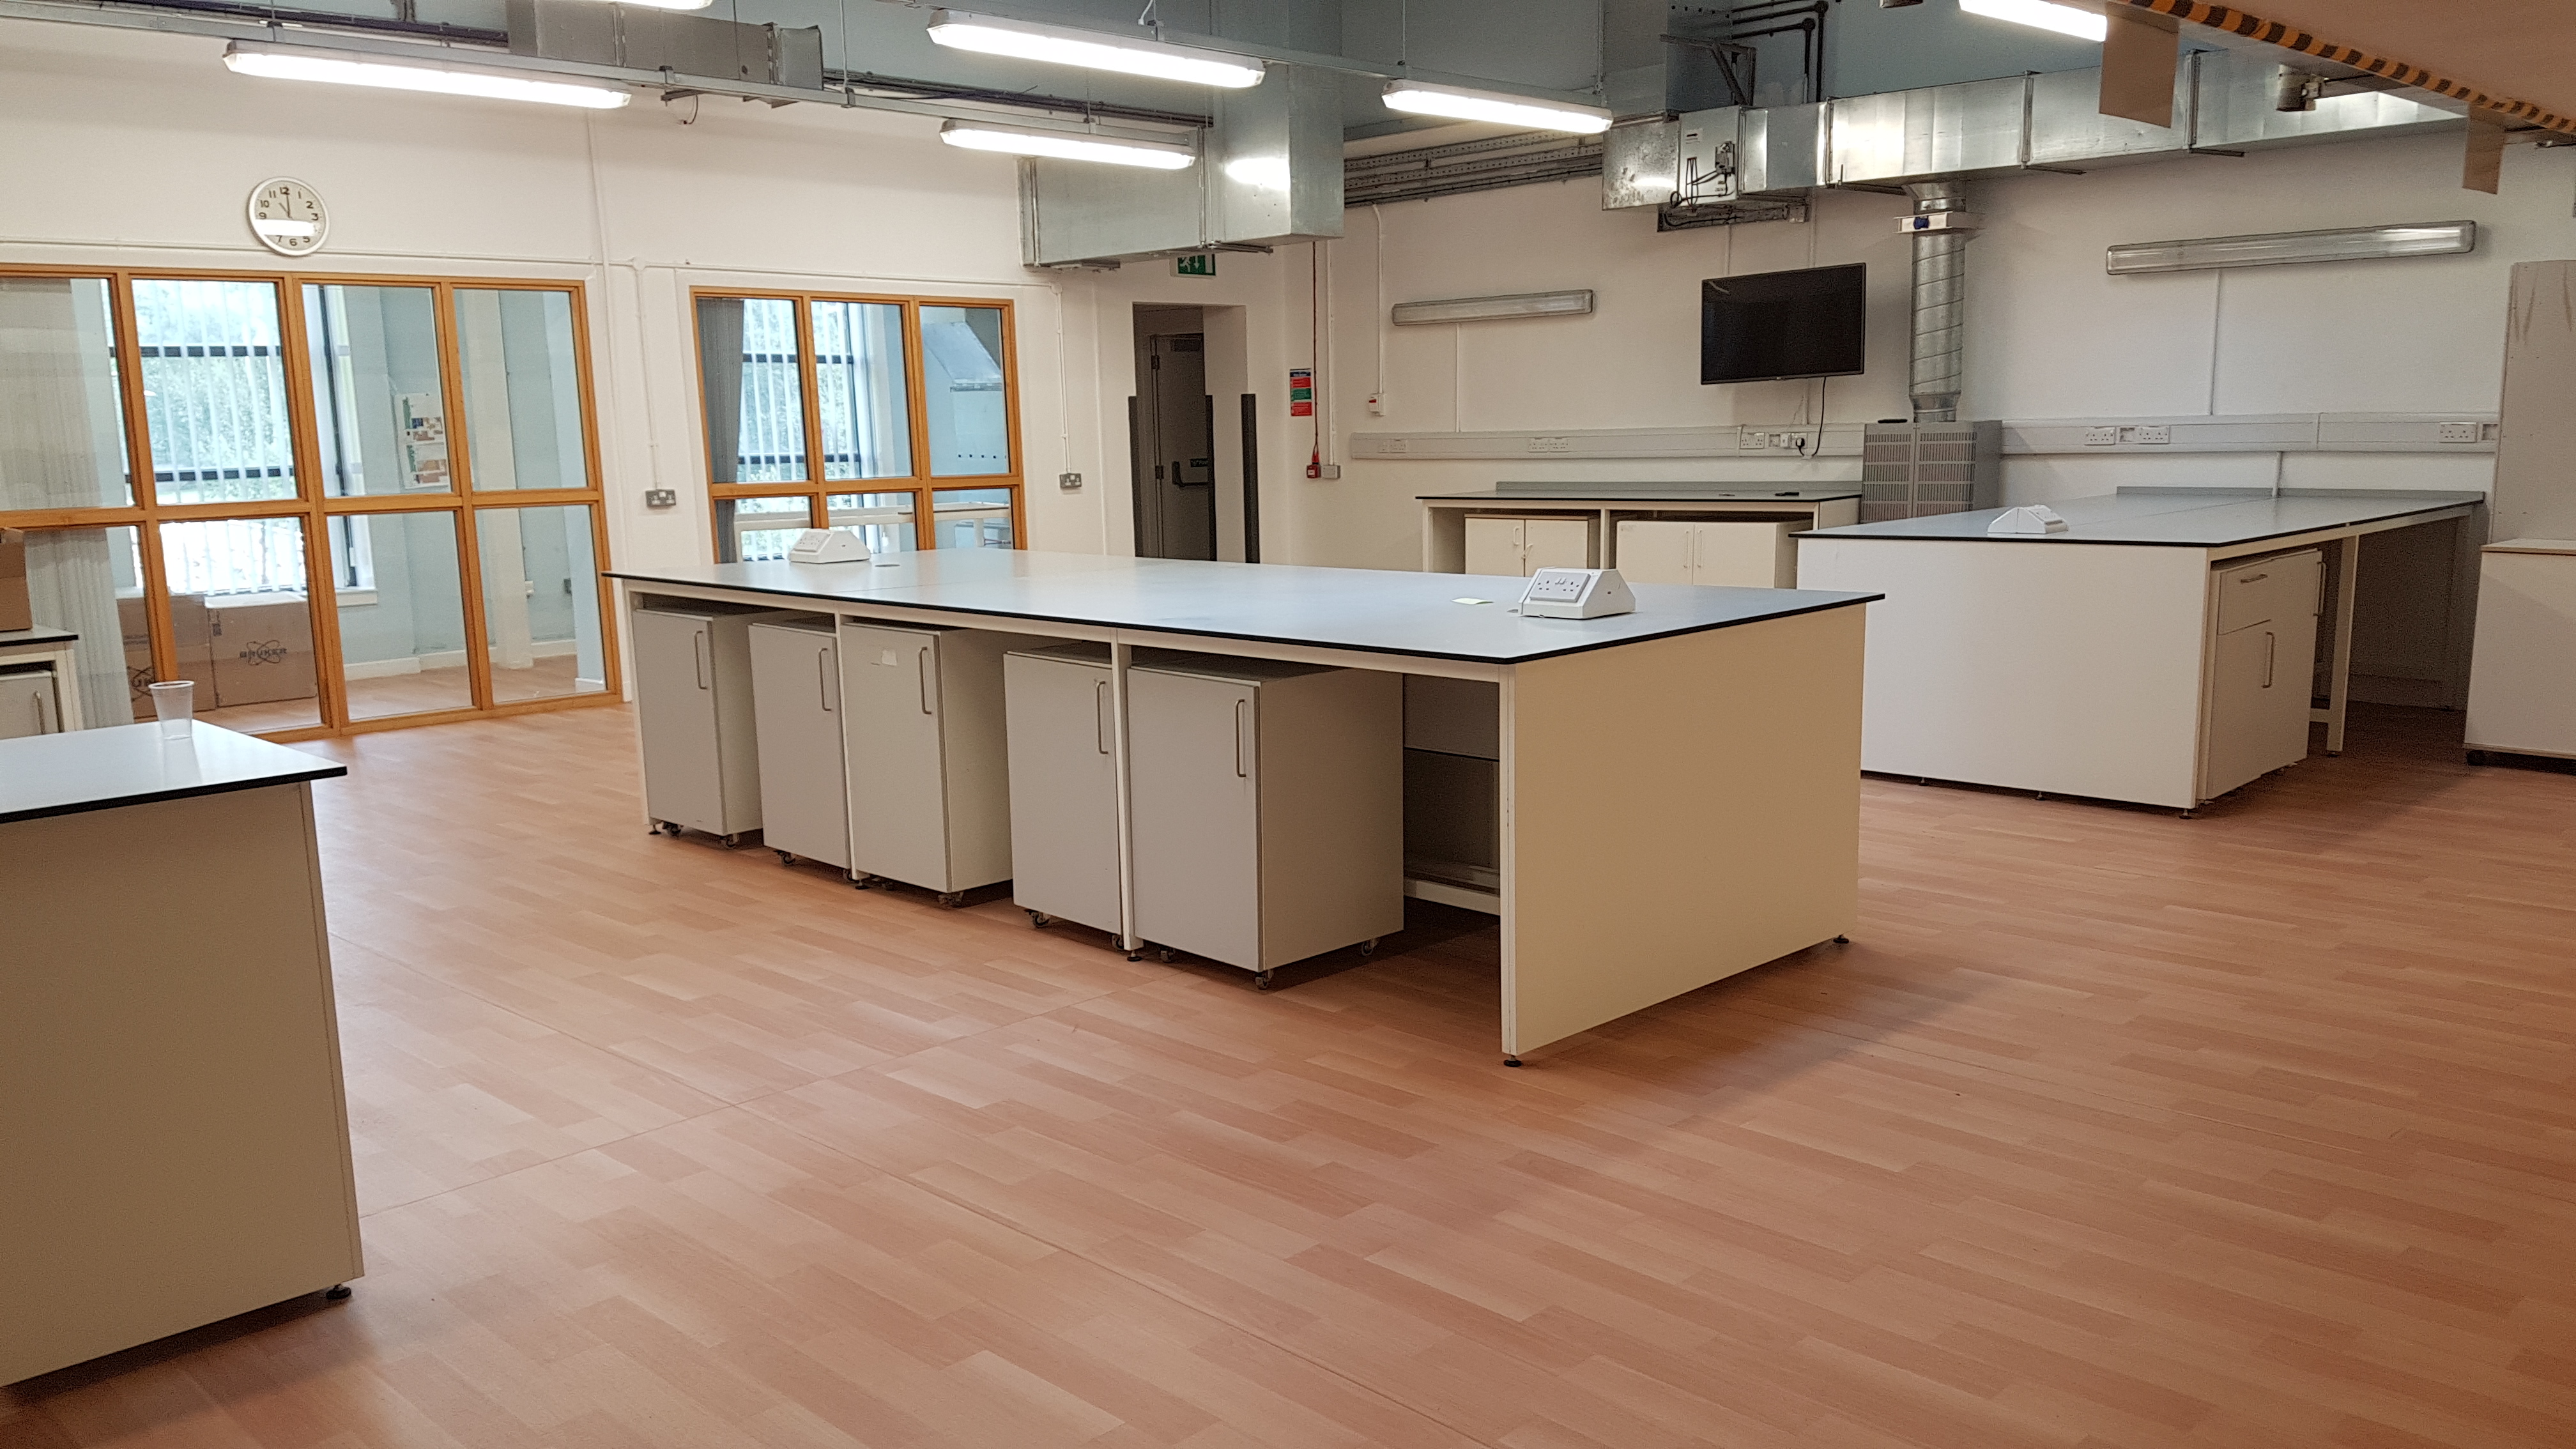 Image of the soon-to-be new ACG laboratory, taken during refurbishment work in August 2017